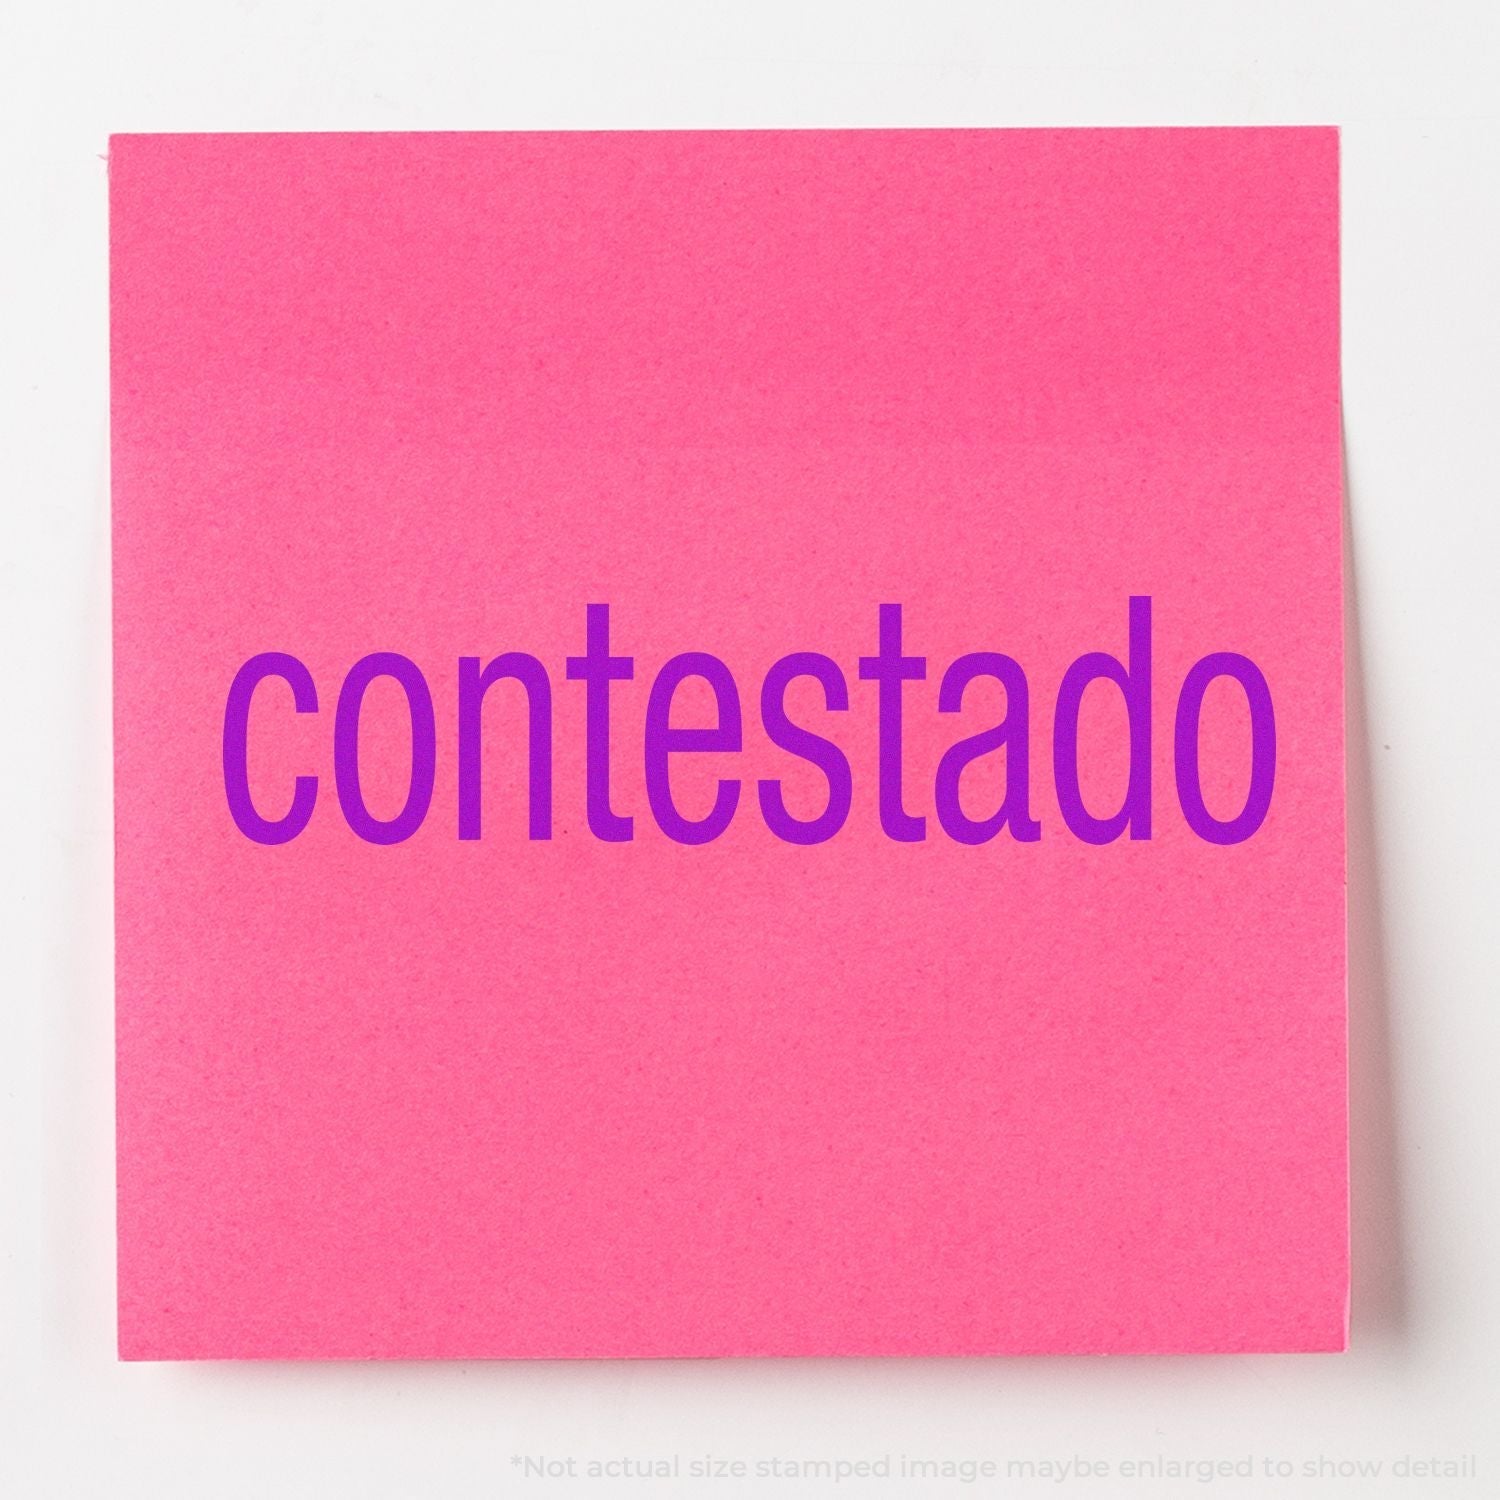 A stock office pre-inked stamp with a stamped image showing how the text "contestado" in a large font is displayed after stamping.